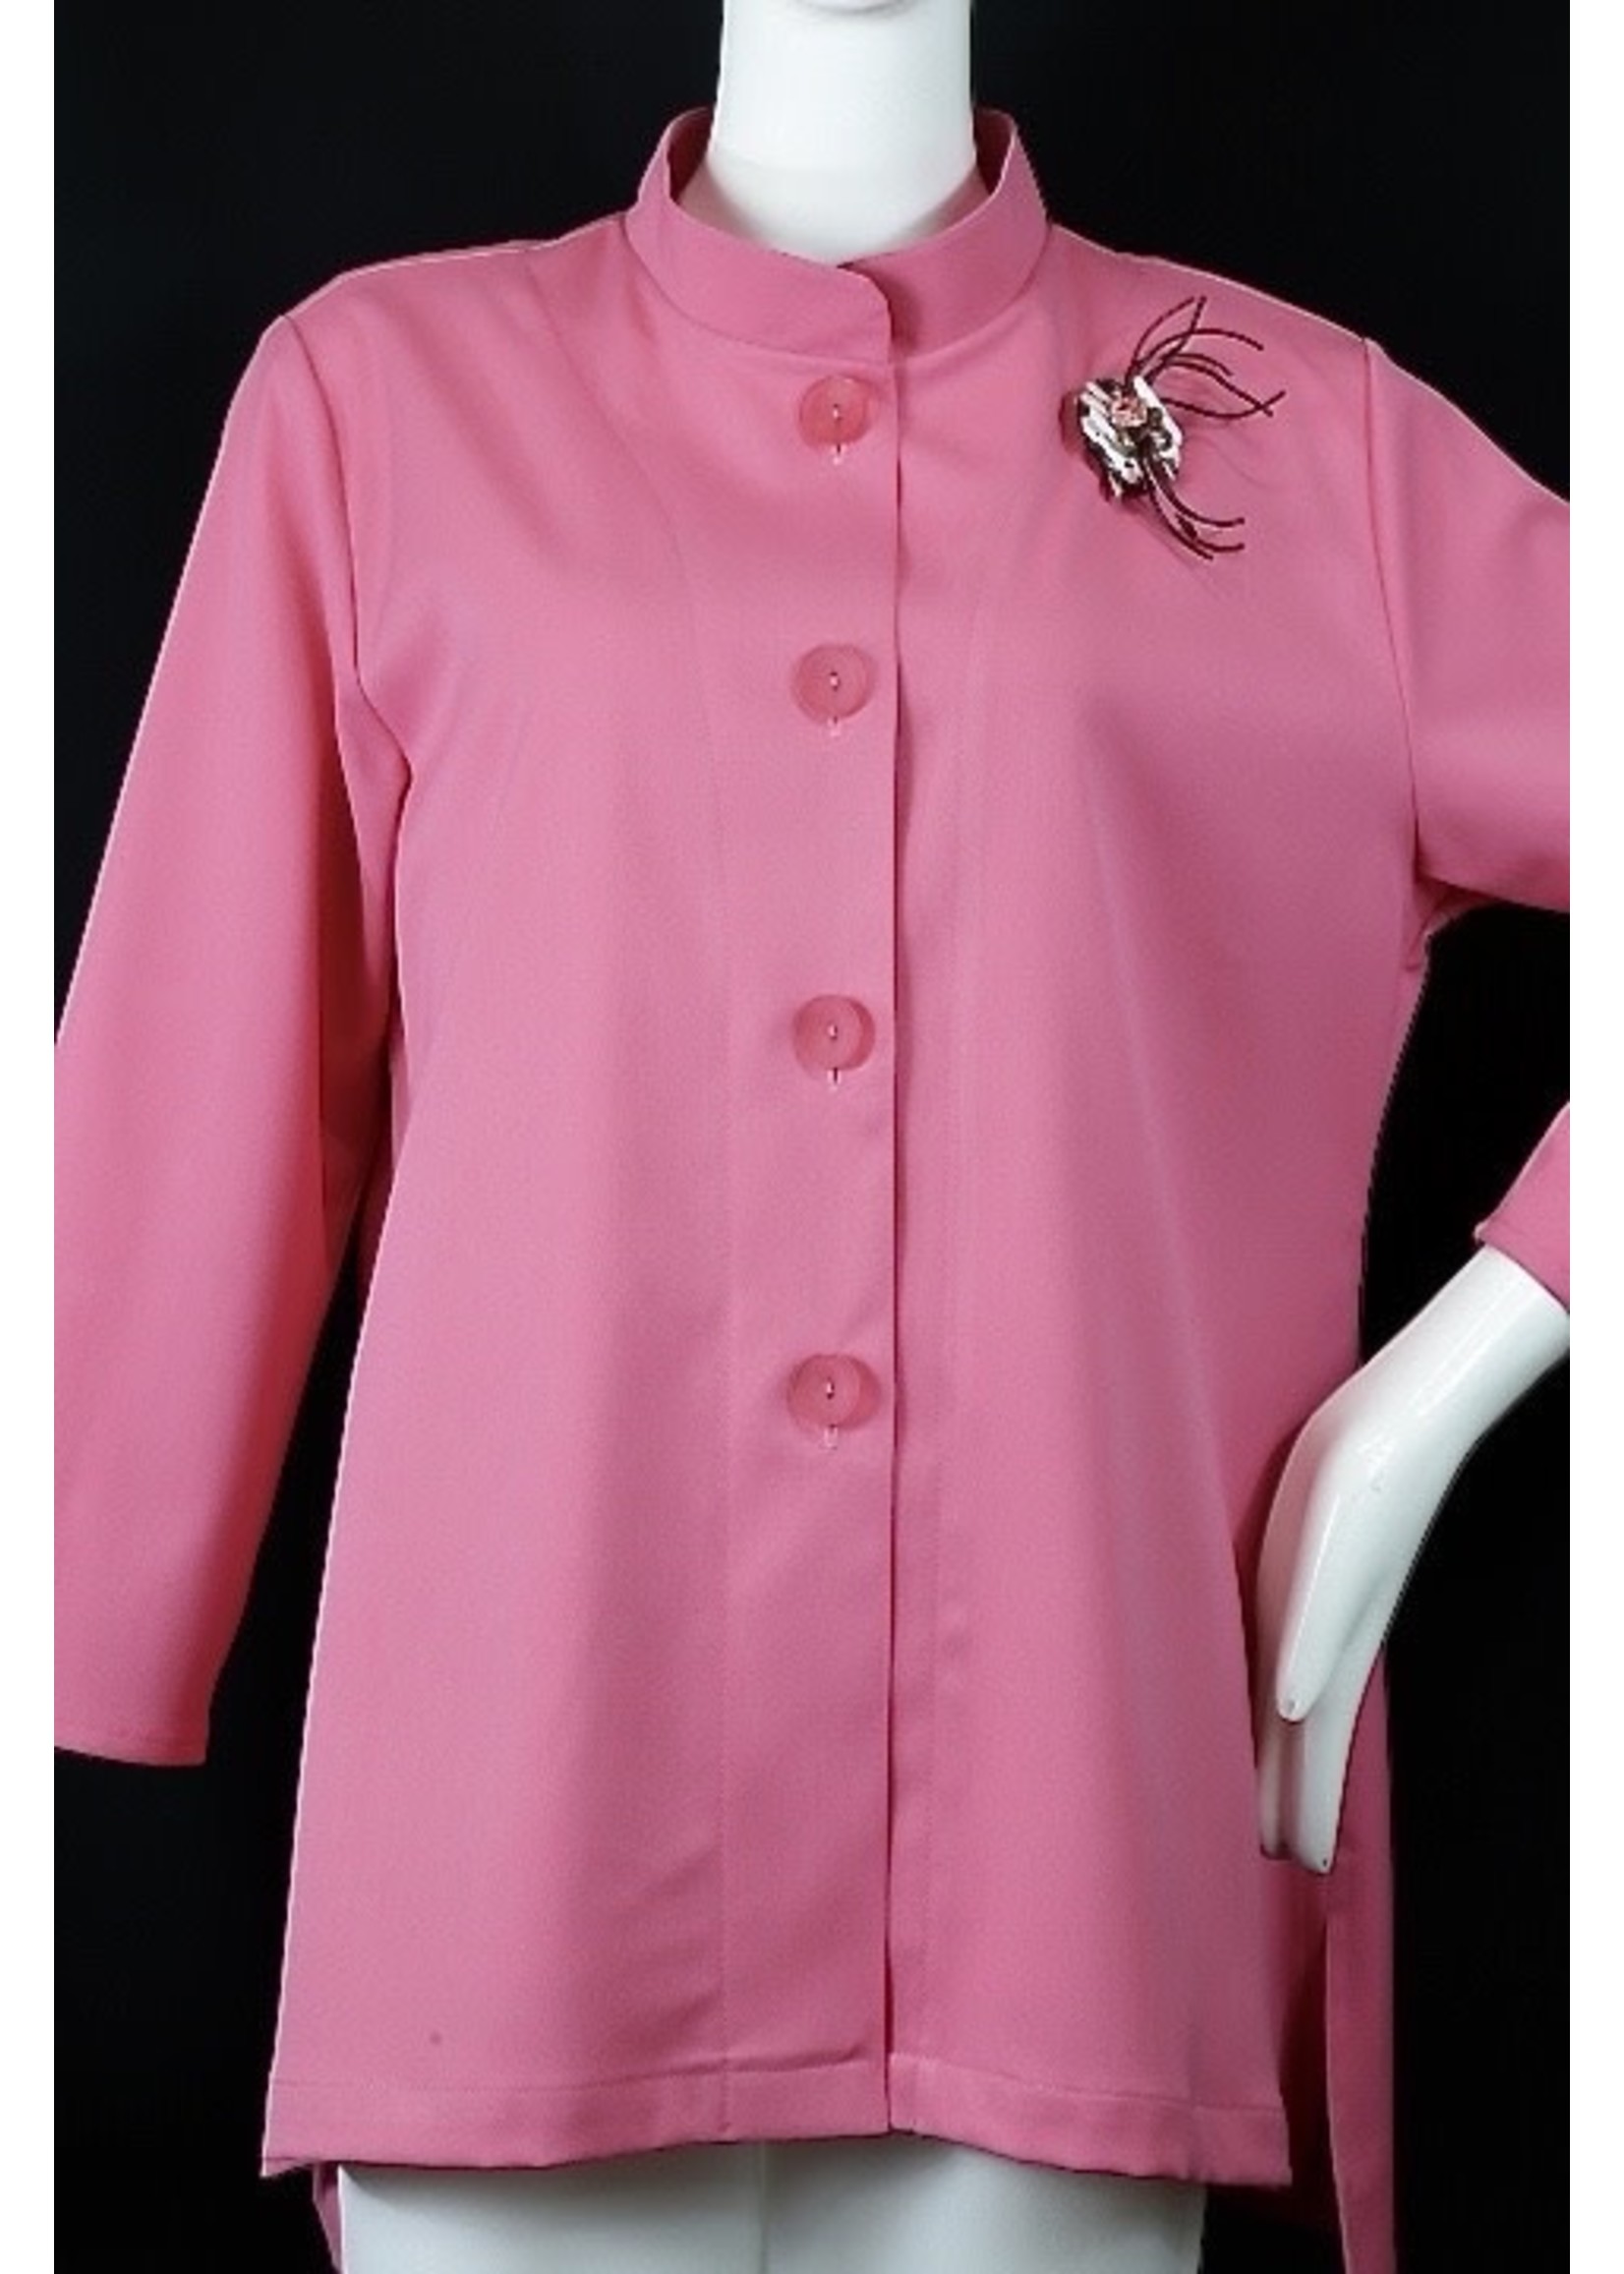 J5647-L0422-XP Hot pink linen jacket with rounded patch pockets